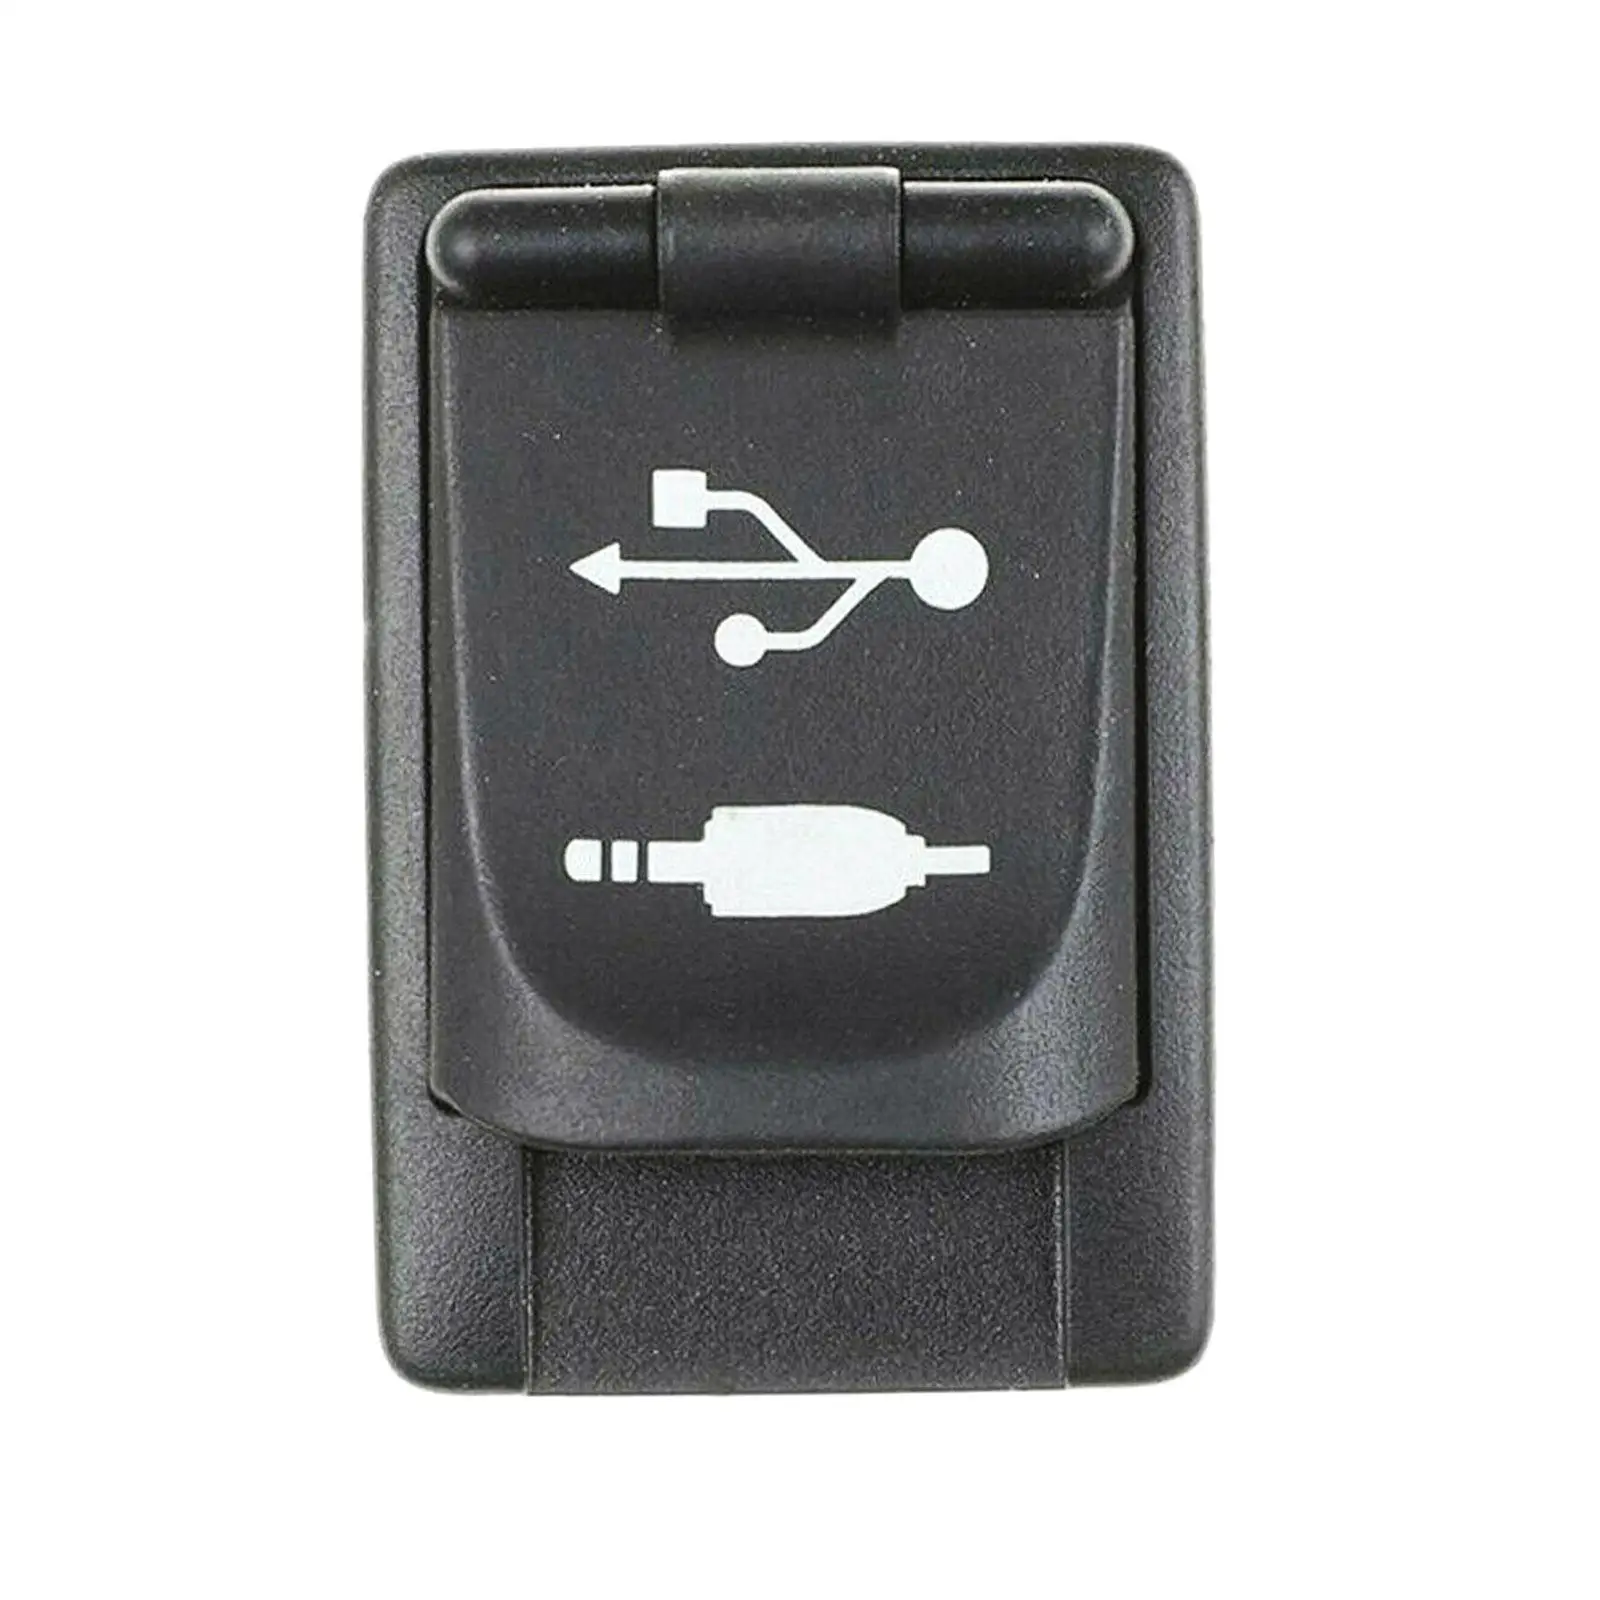 USB Port Adapter Jack Accessories Vehicle Fits for  Sienna Camry